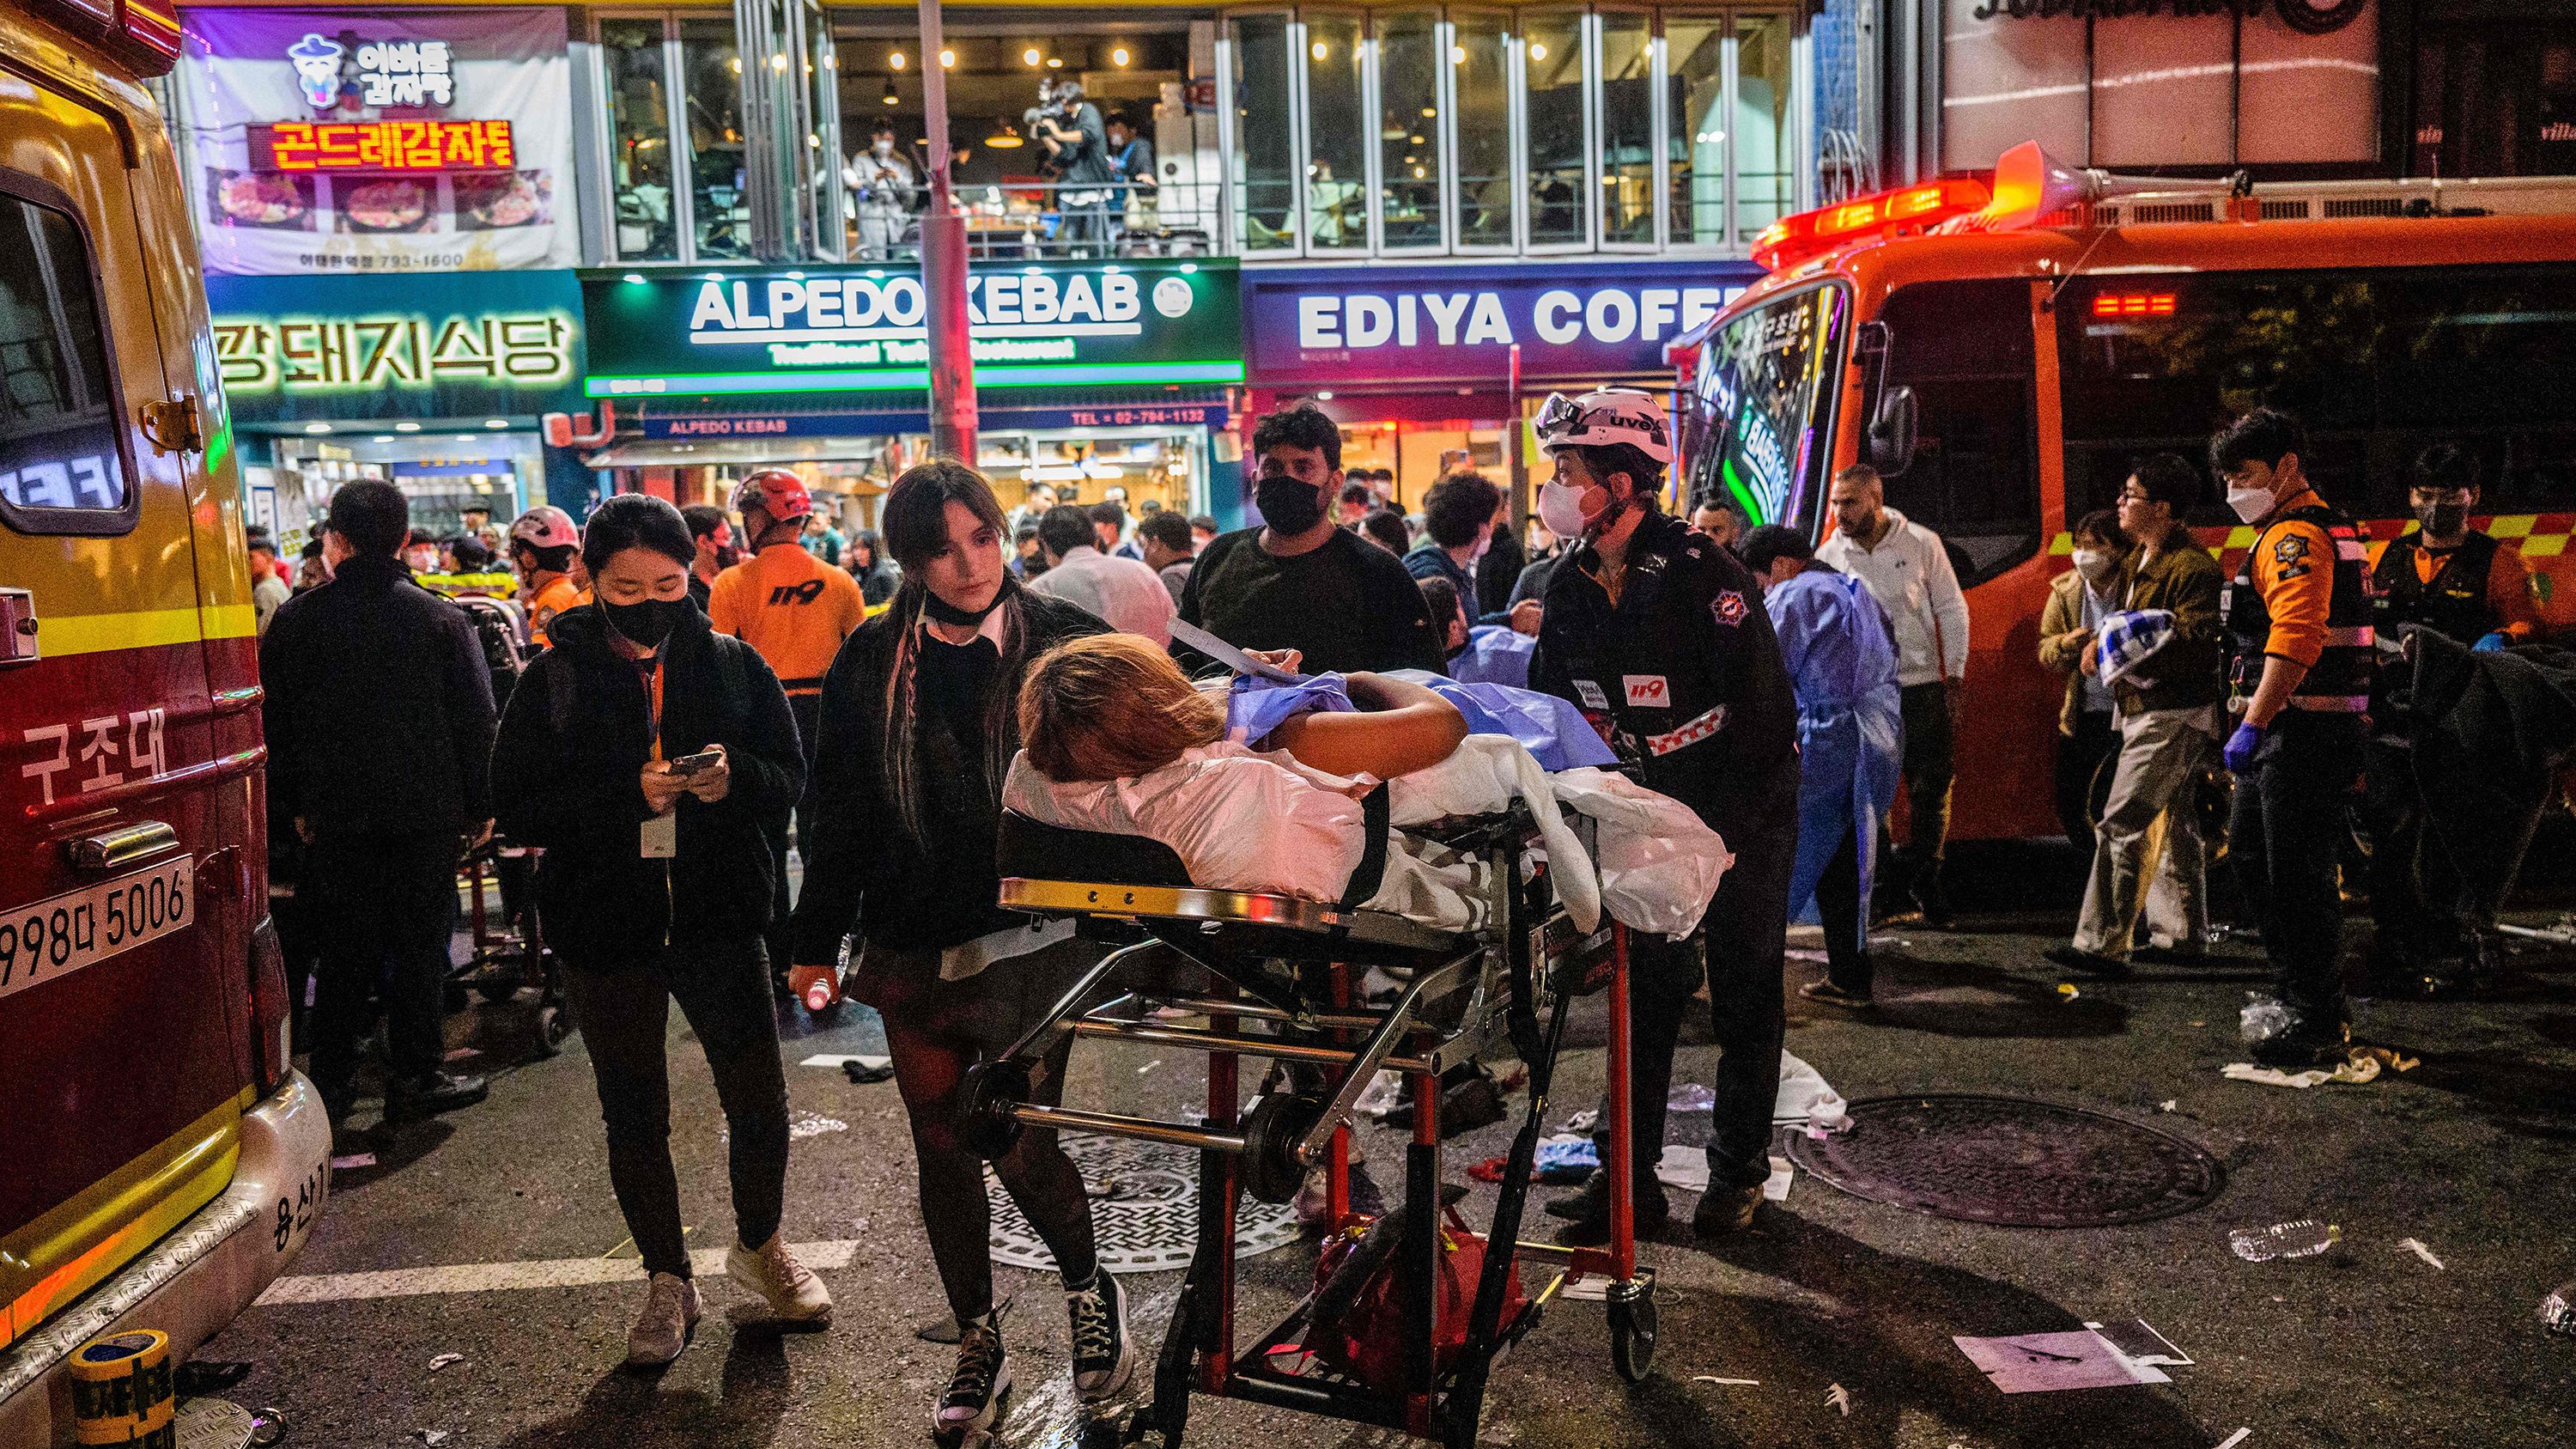 In this photo taken early on October 30, 2022, rescue workers help a person  on a stretcher after a Halloween crowd crush that took place in a nearby alleyway in the popular district of Itaewon in Seoul.